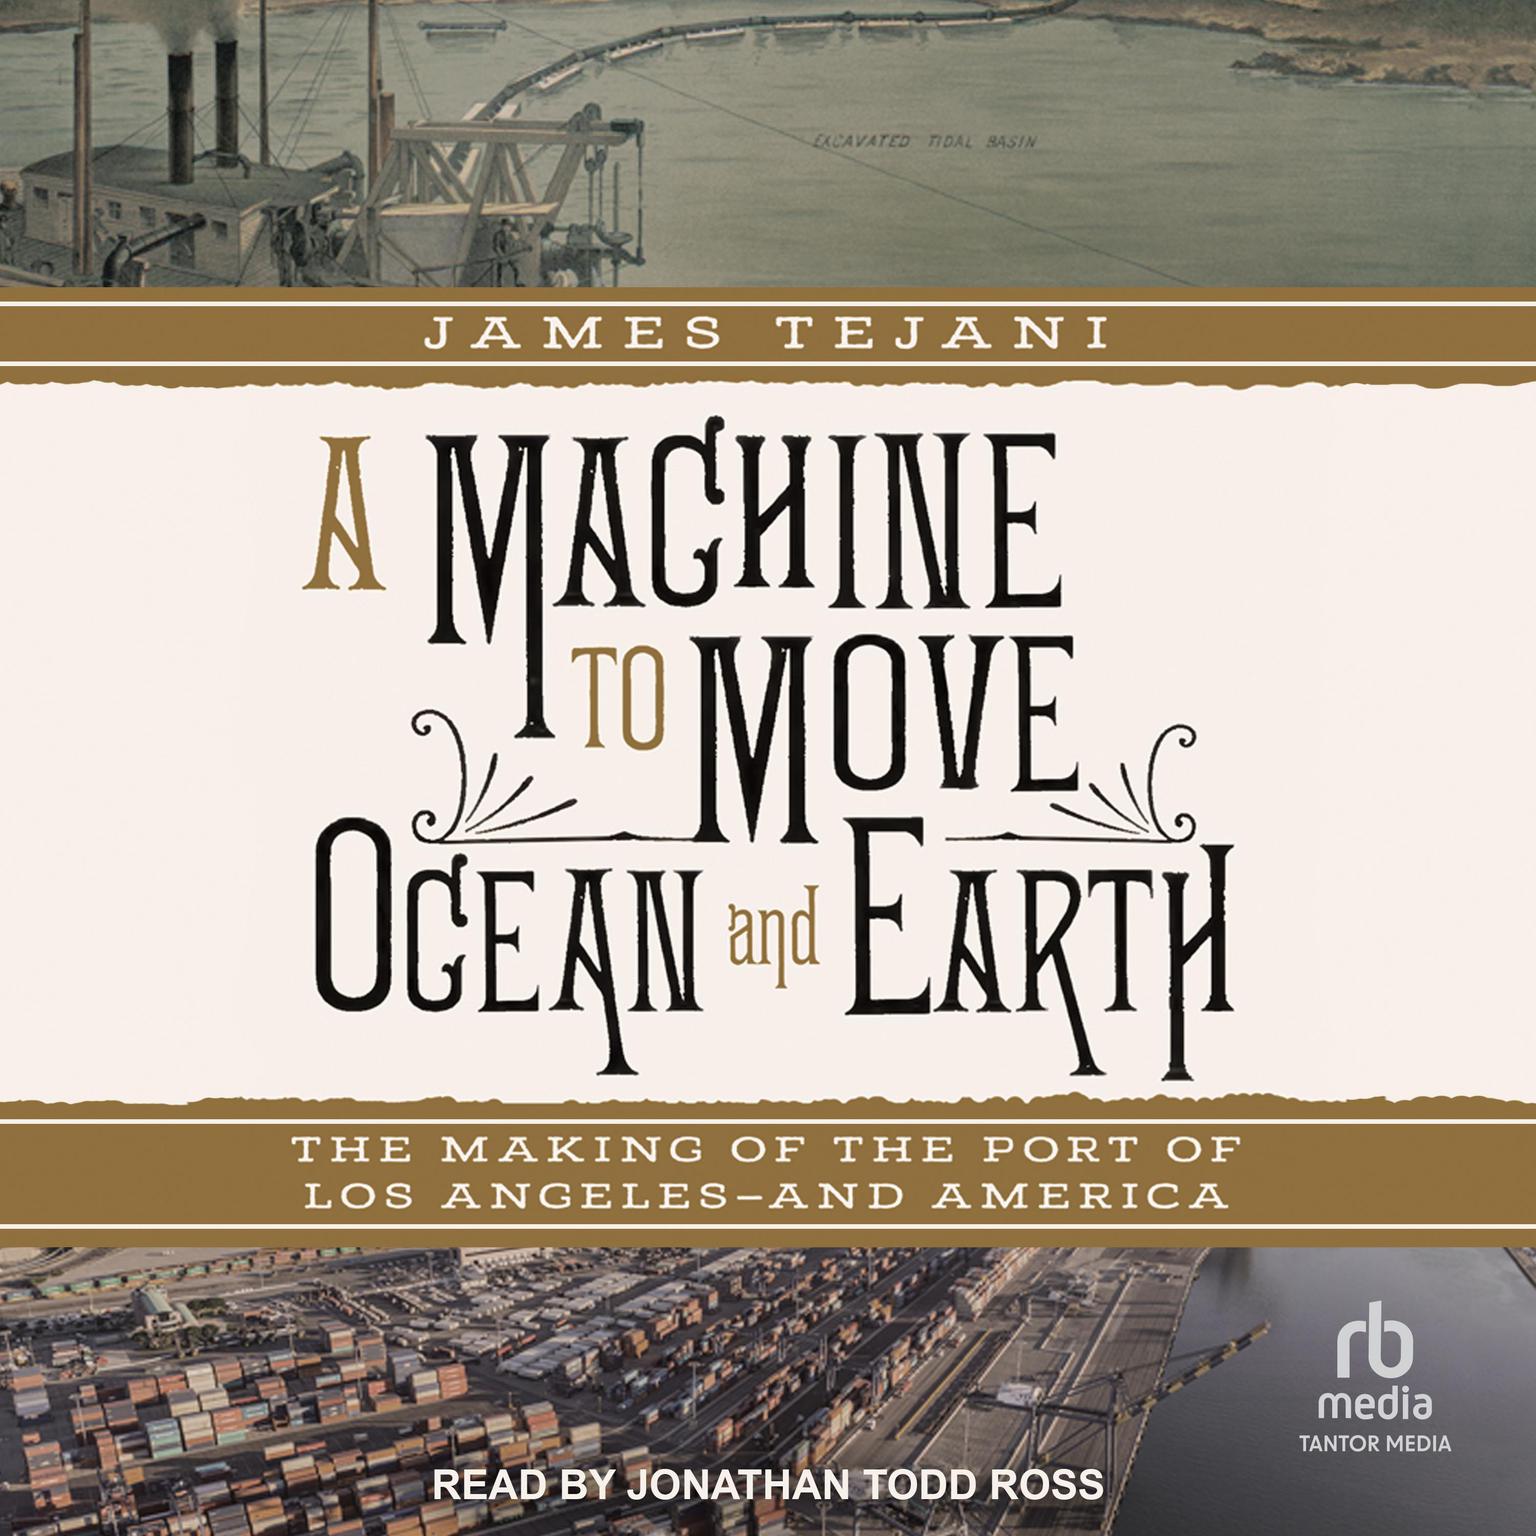 A Machine to Move Ocean and Earth: The Making of the Port of Los Angeles and America Audiobook, by James Tejani